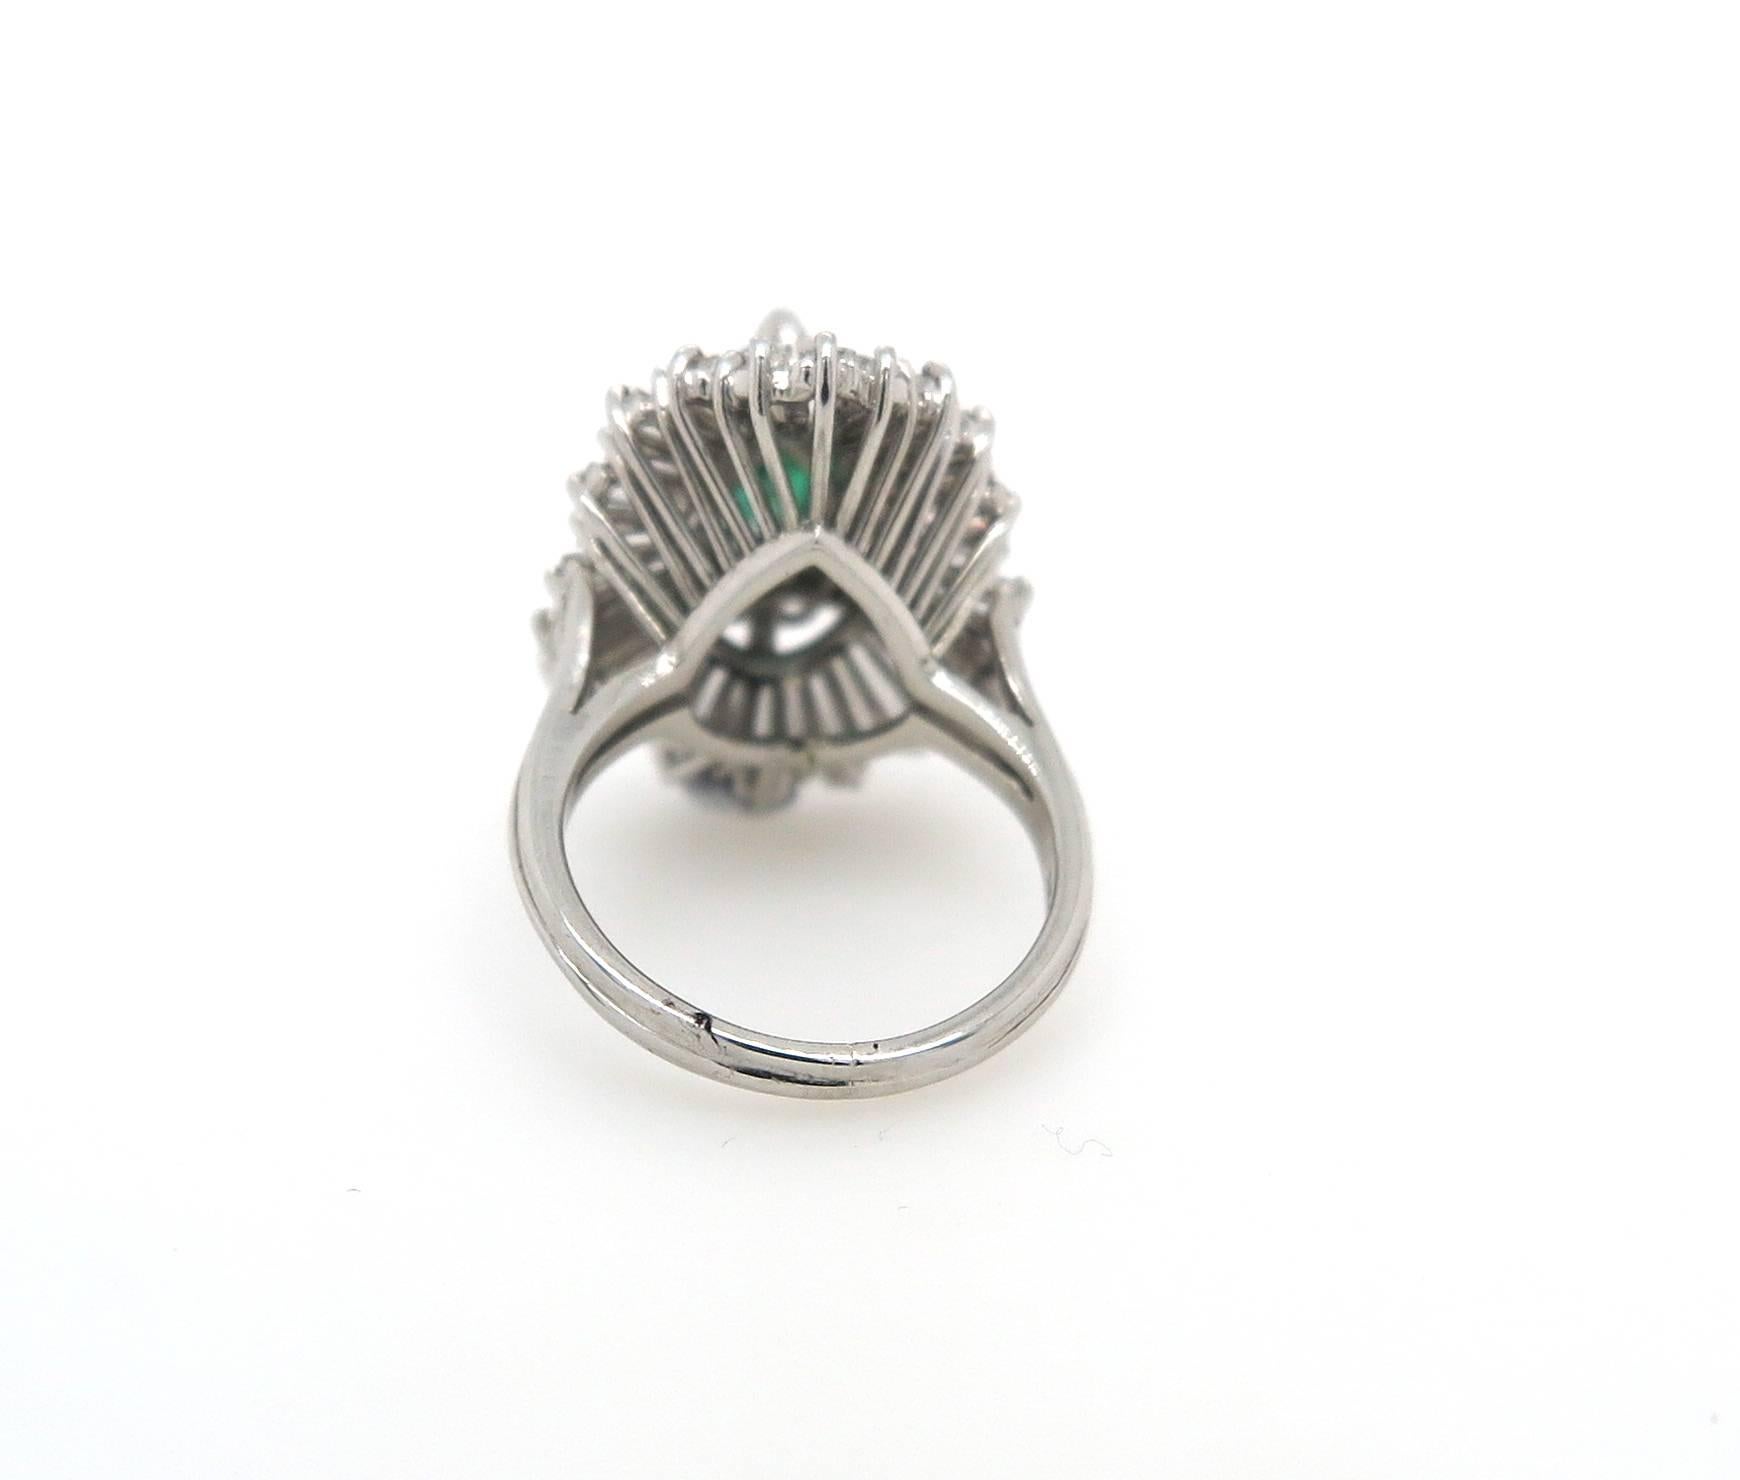 Modern 2.15 Carat Pear Shaped Colombian Emerald and 3.95 Carat Diamond Cocktail Ring For Sale